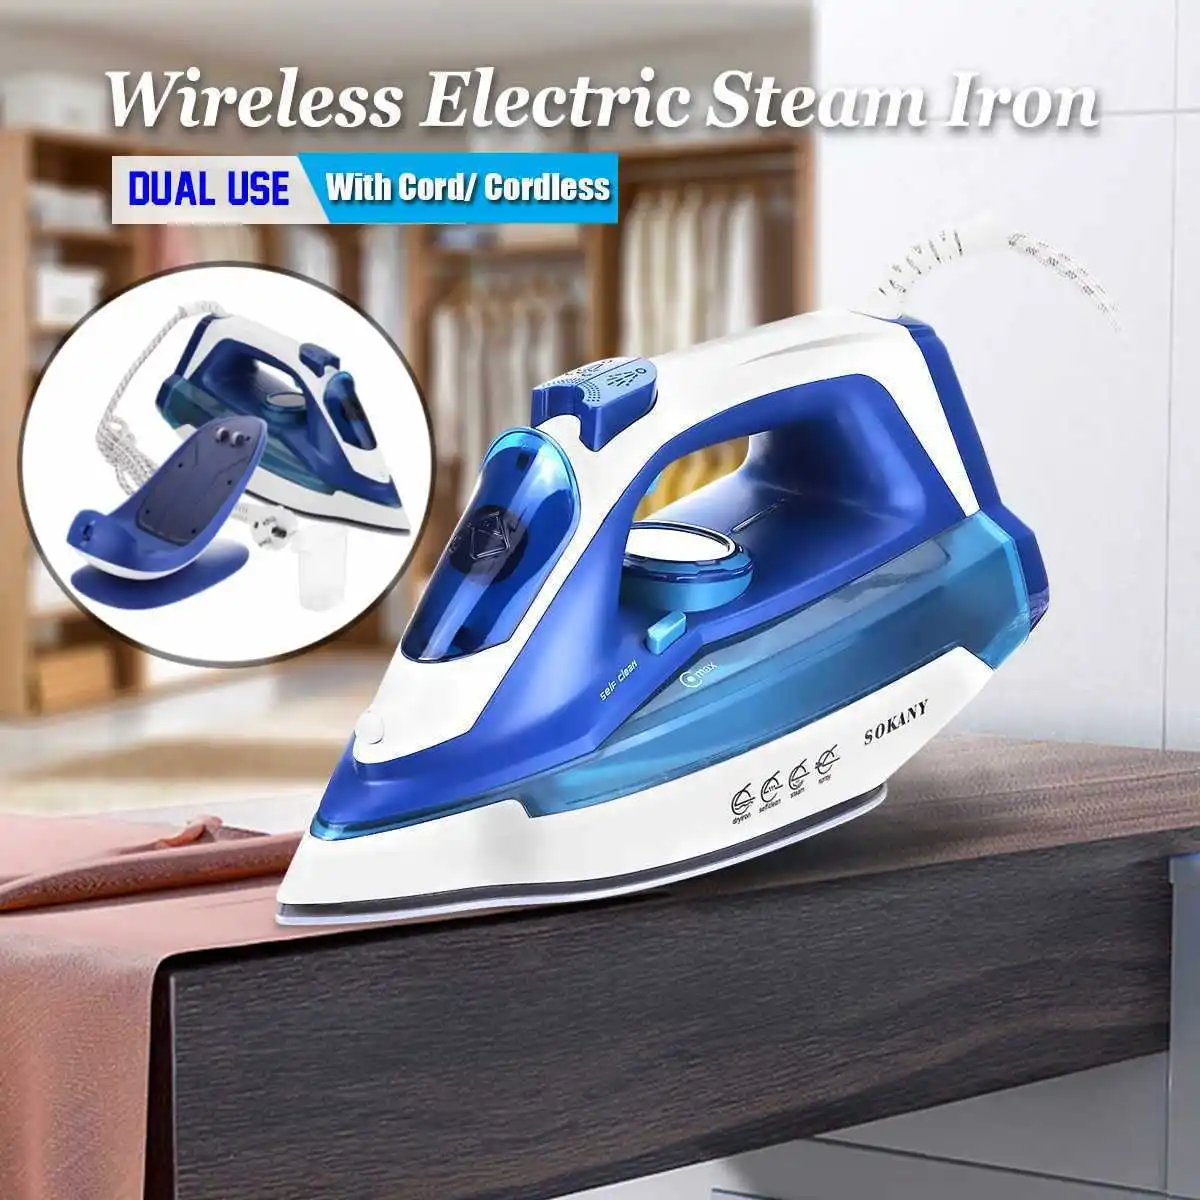 2400 Watt Corded/Cordless Steam Iron with Nonstick Soleplate, Self-Cleaning Steamer for Clothes